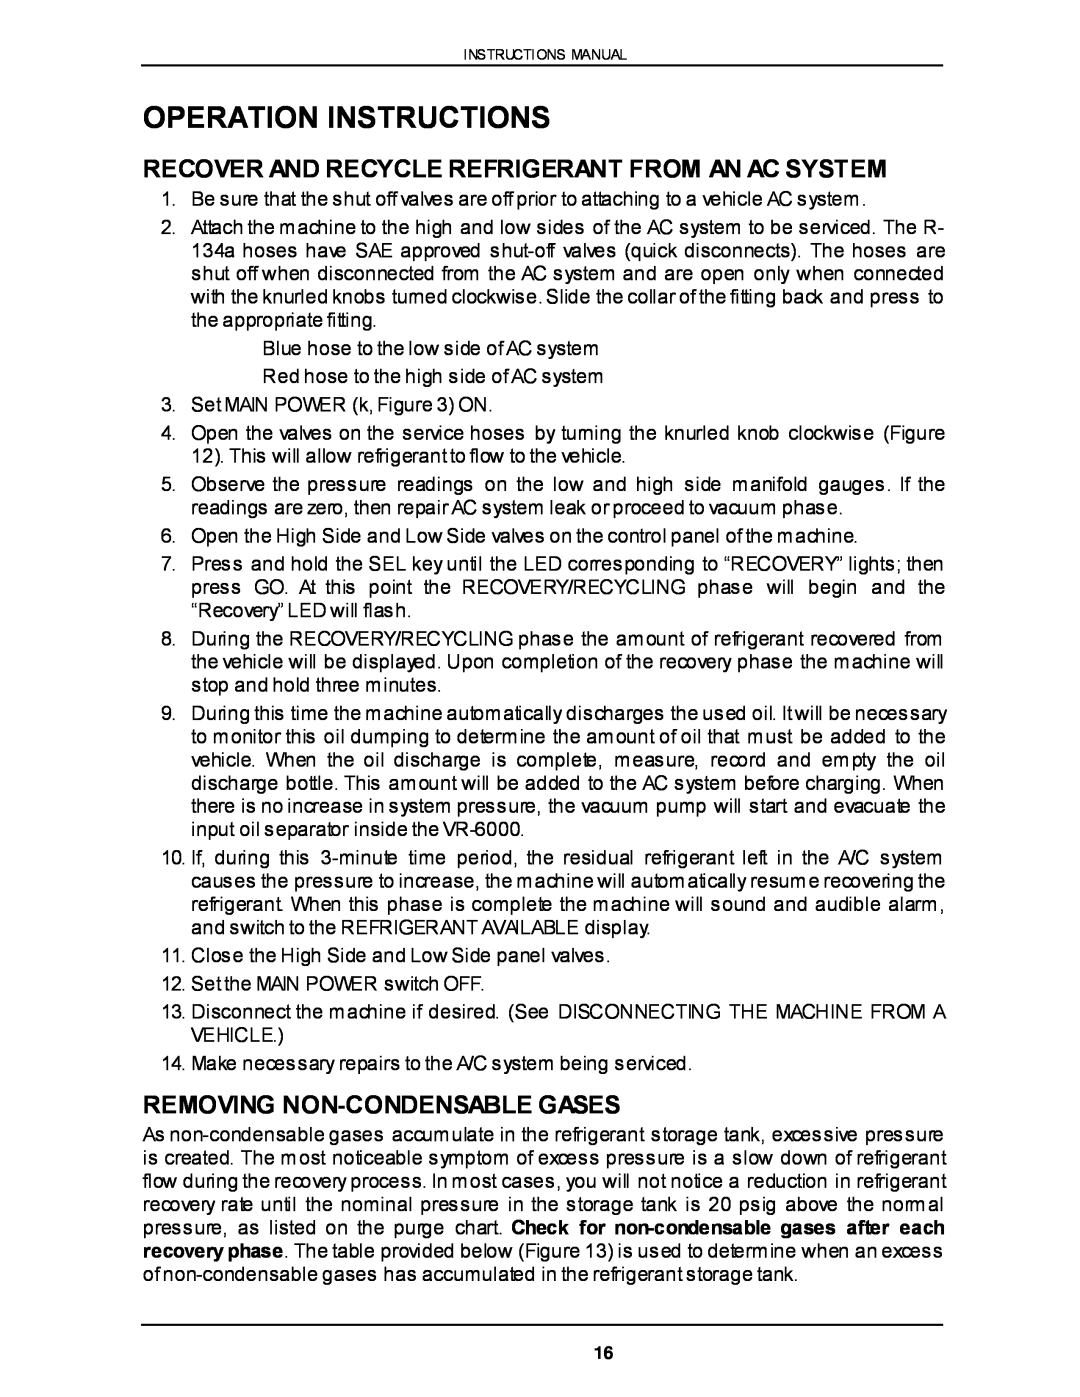 Viper VR-6000 Operation Instructions, Recover And Recycle Refrigerant From An Ac System, Removing Non-Condensablegases 